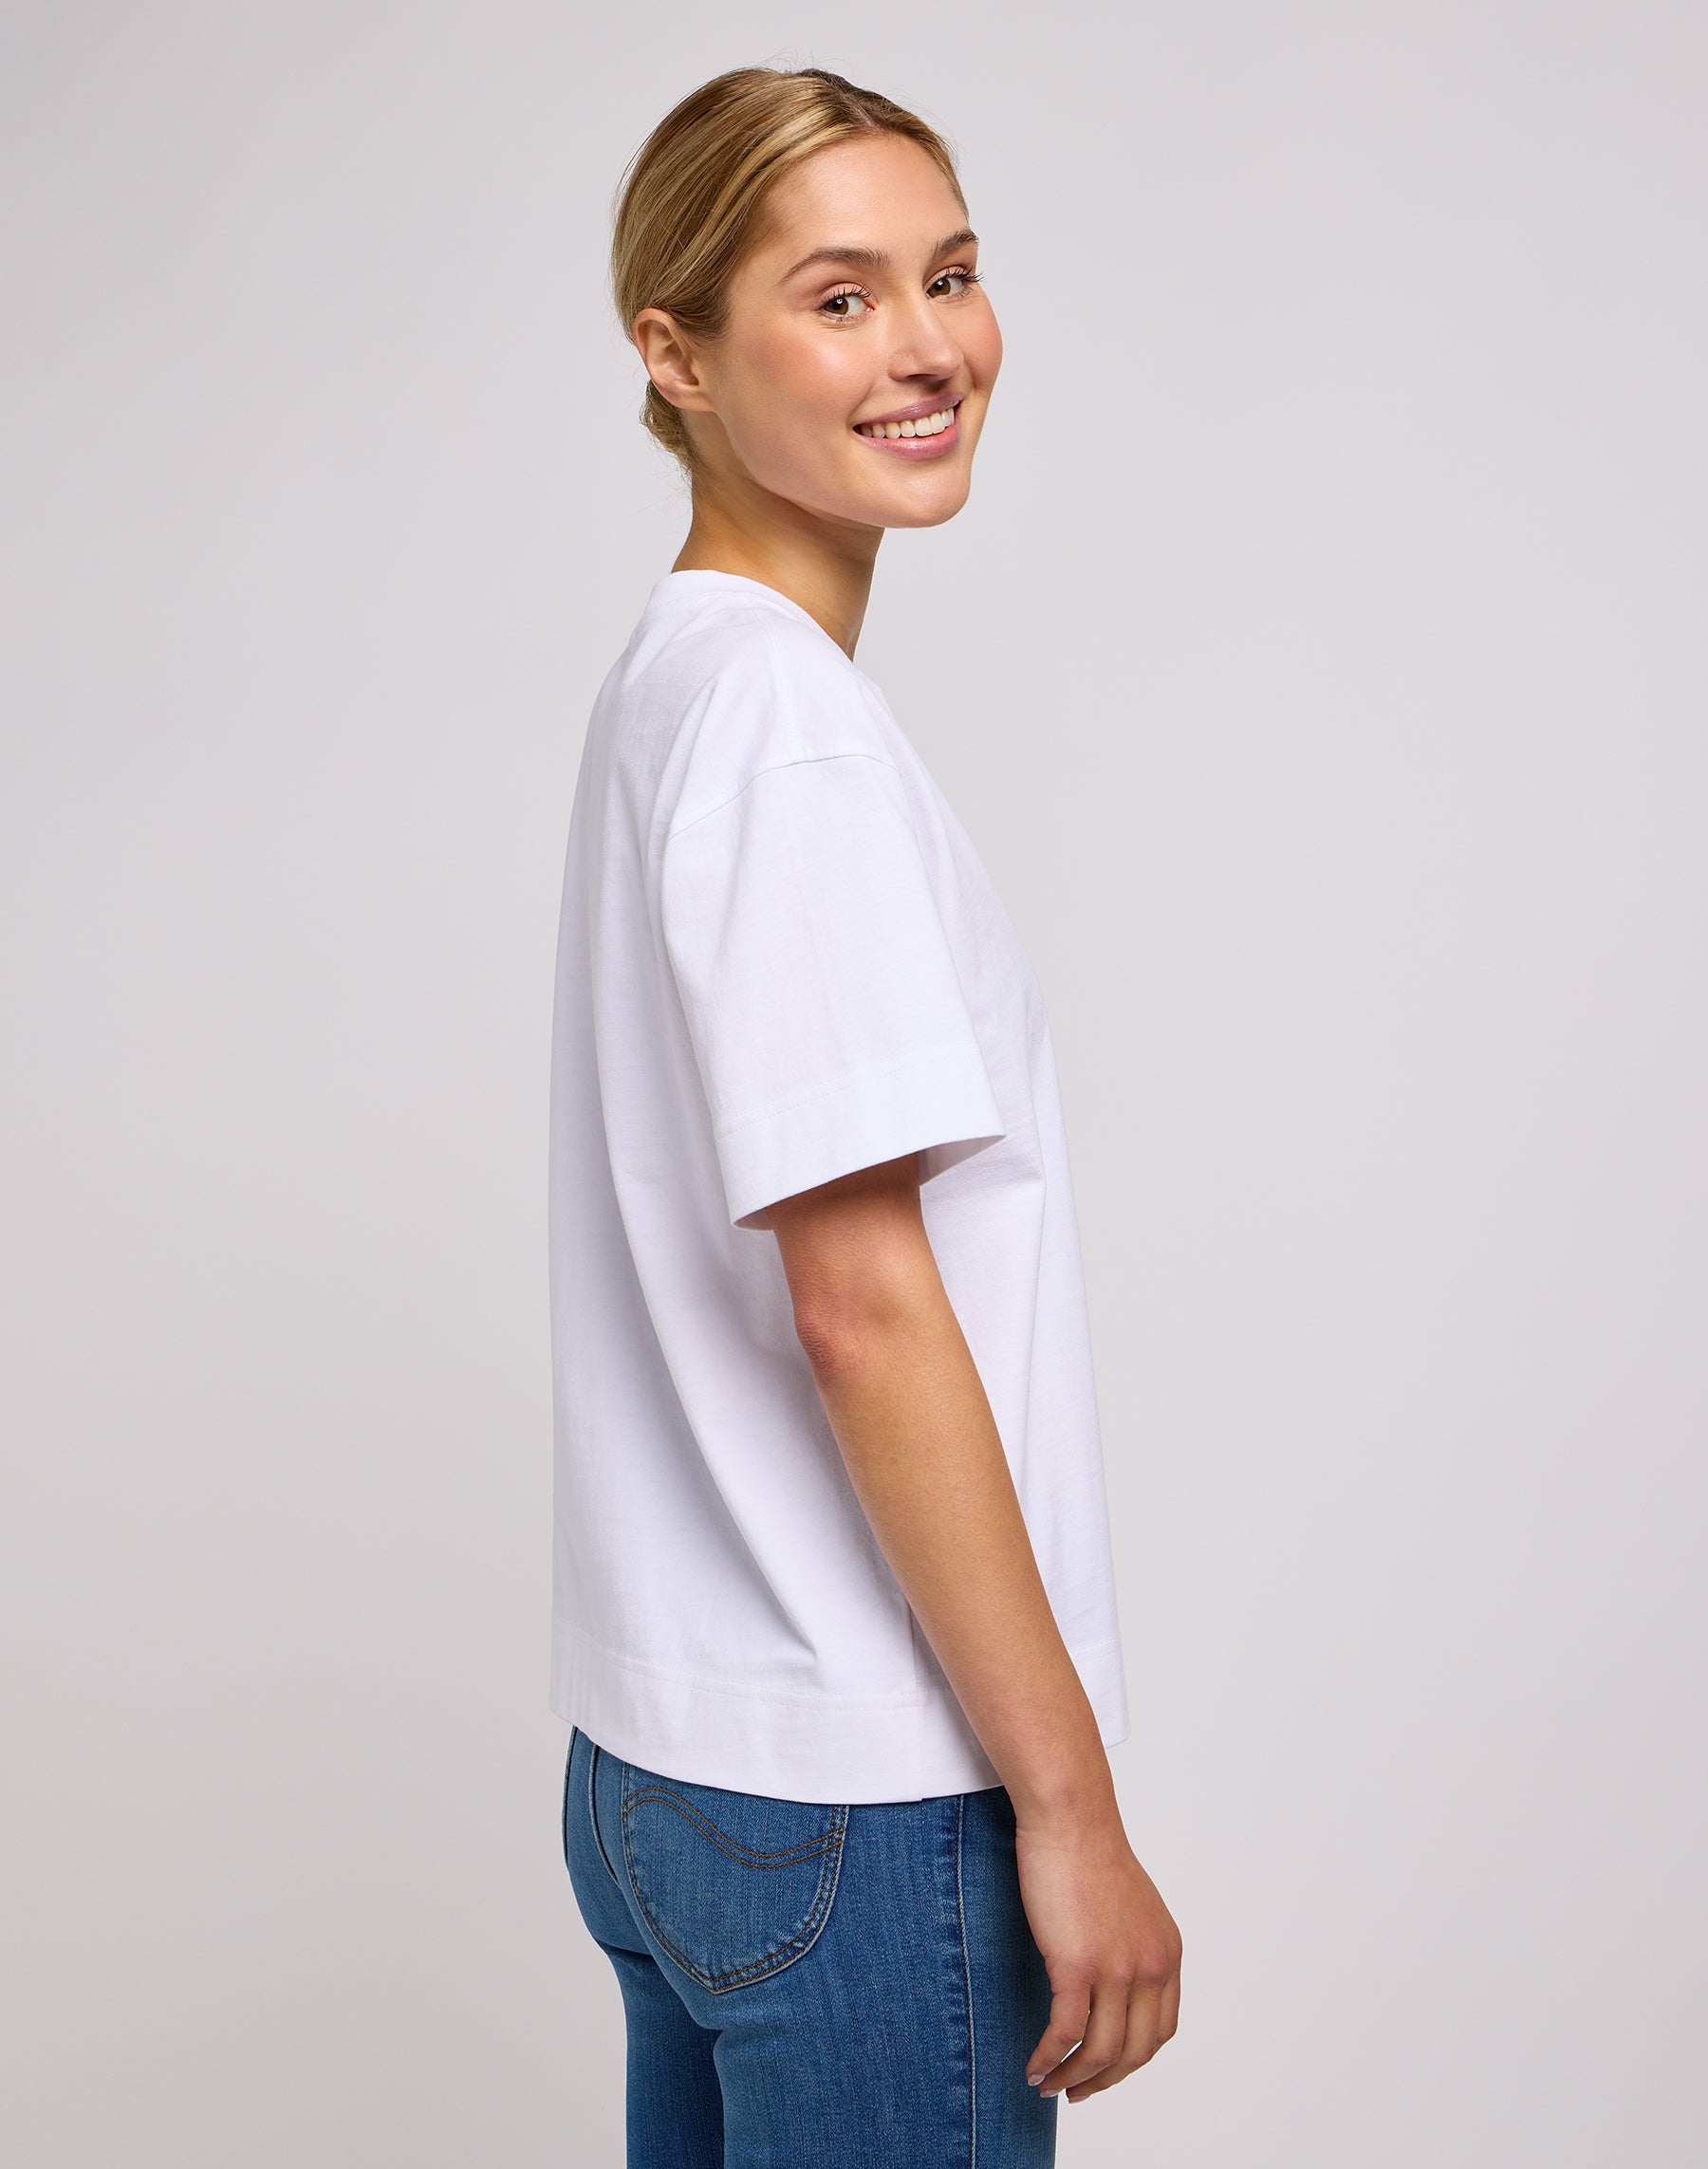 Pocket Tee in Bright White T-Shirts Lee   